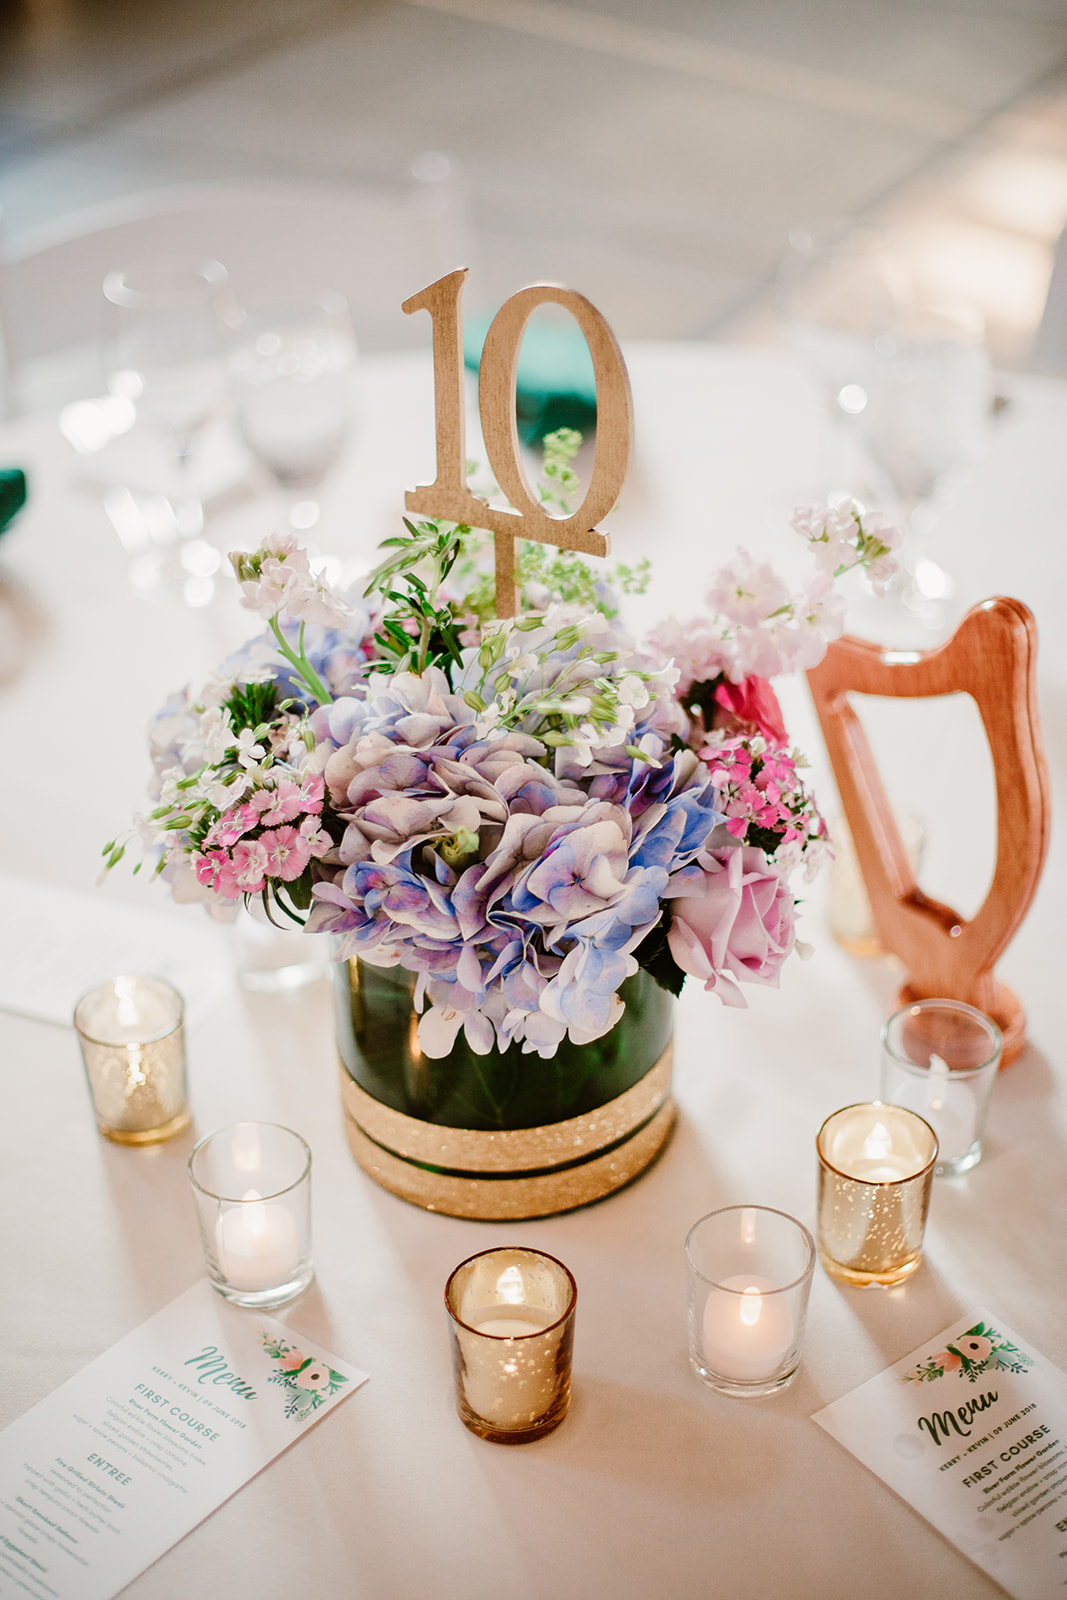  Wedding reception at Eastern Market in Washington D.C. Irish wedding with green and gold accents. Sarah Mattozzi Photography. 